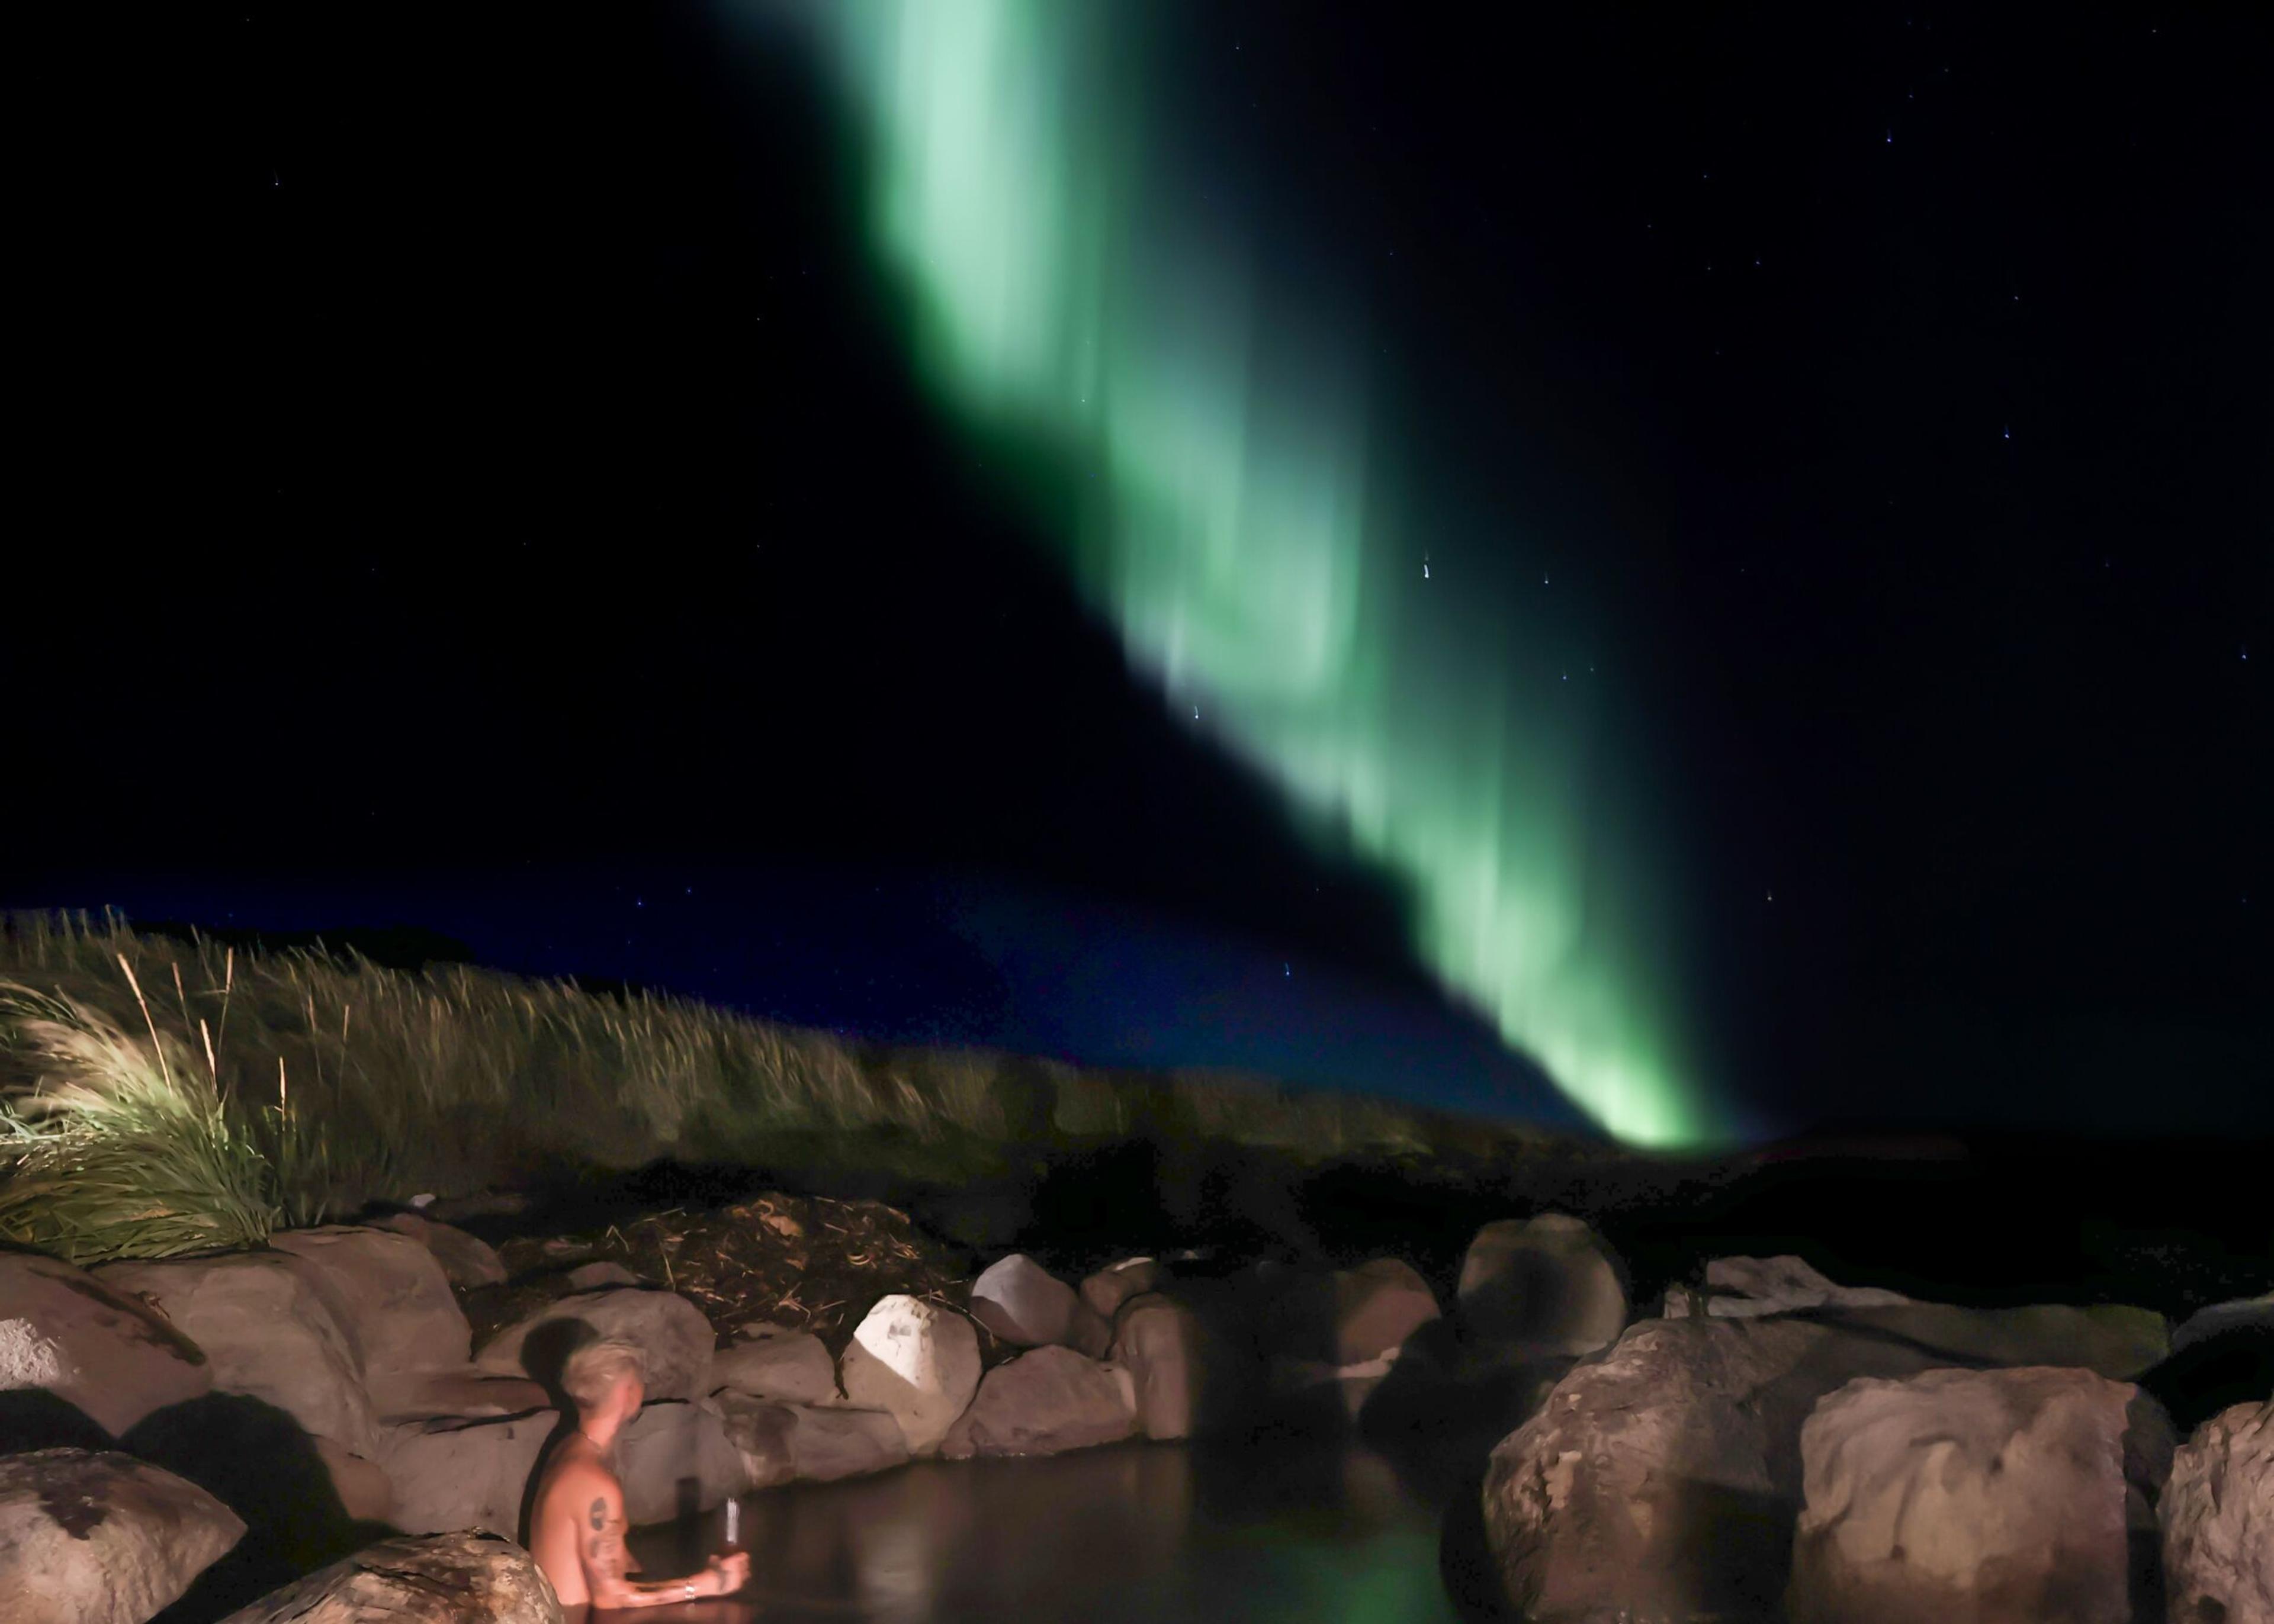 A man unwinds in a steaming hot spring, gazing upwards at the vibrant Northern Lights shimmering across the night sky while sipping a drink